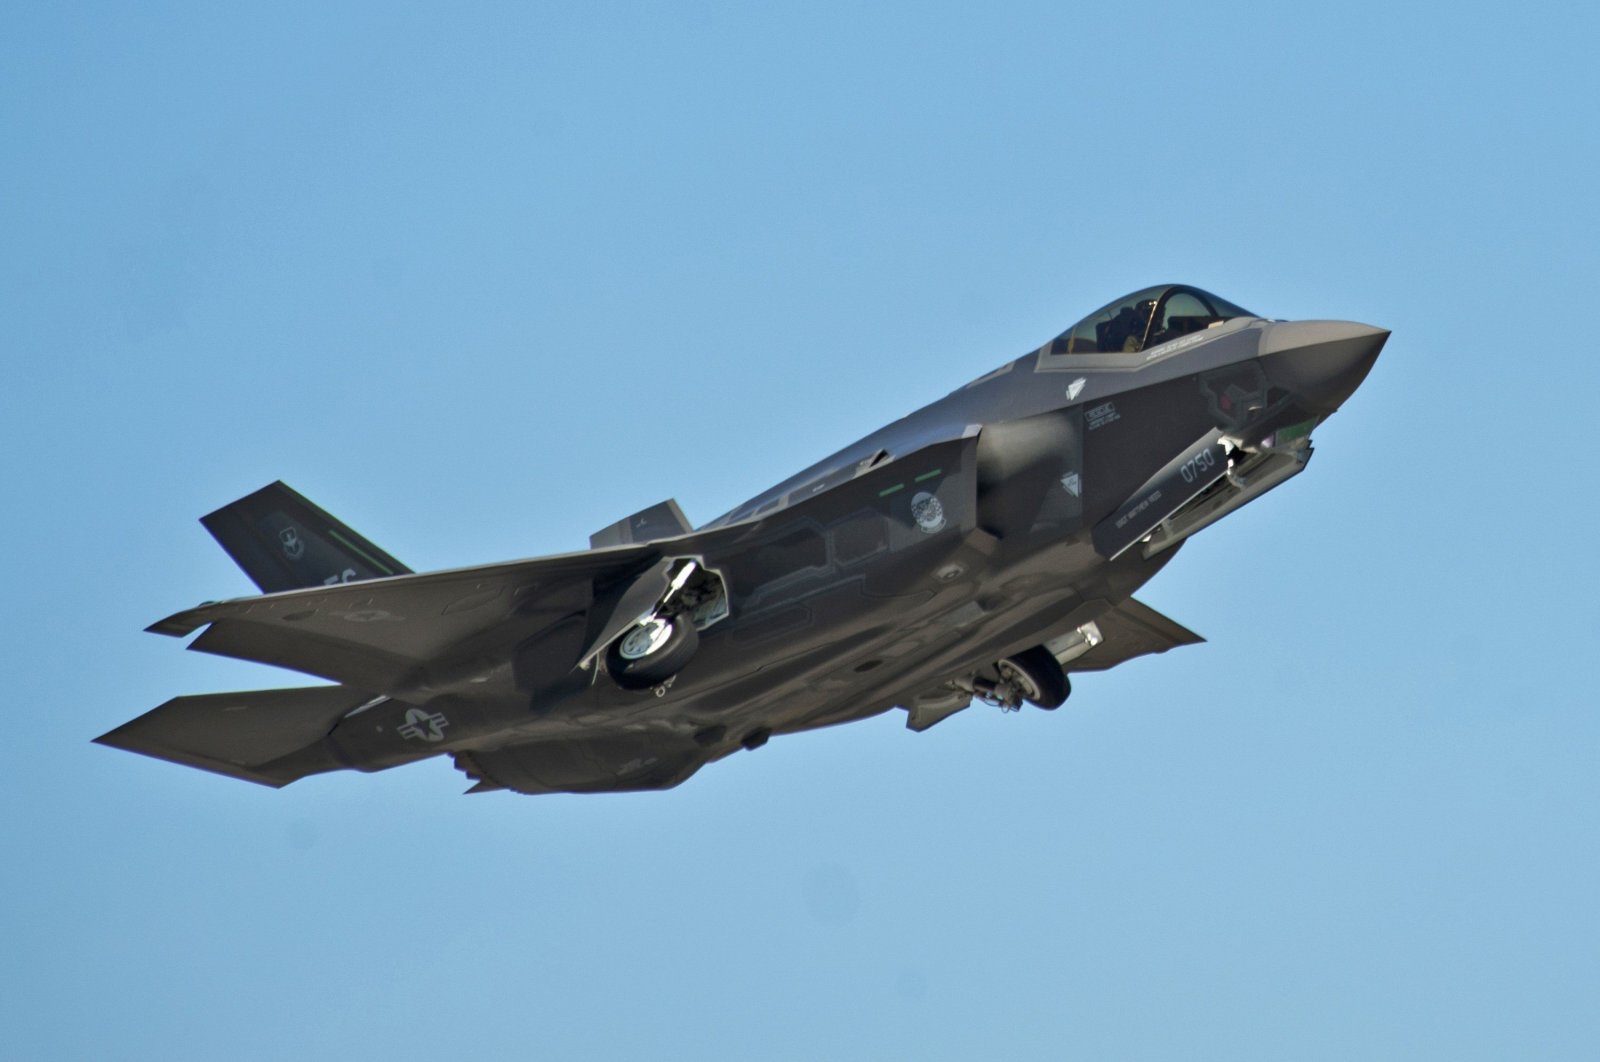 An F-35A Lightning II Joint Strike Fighter takes off on a training sortie at Eglin Air Force Base, Florida, U.S., March 6, 2012. (Reuters Photo)